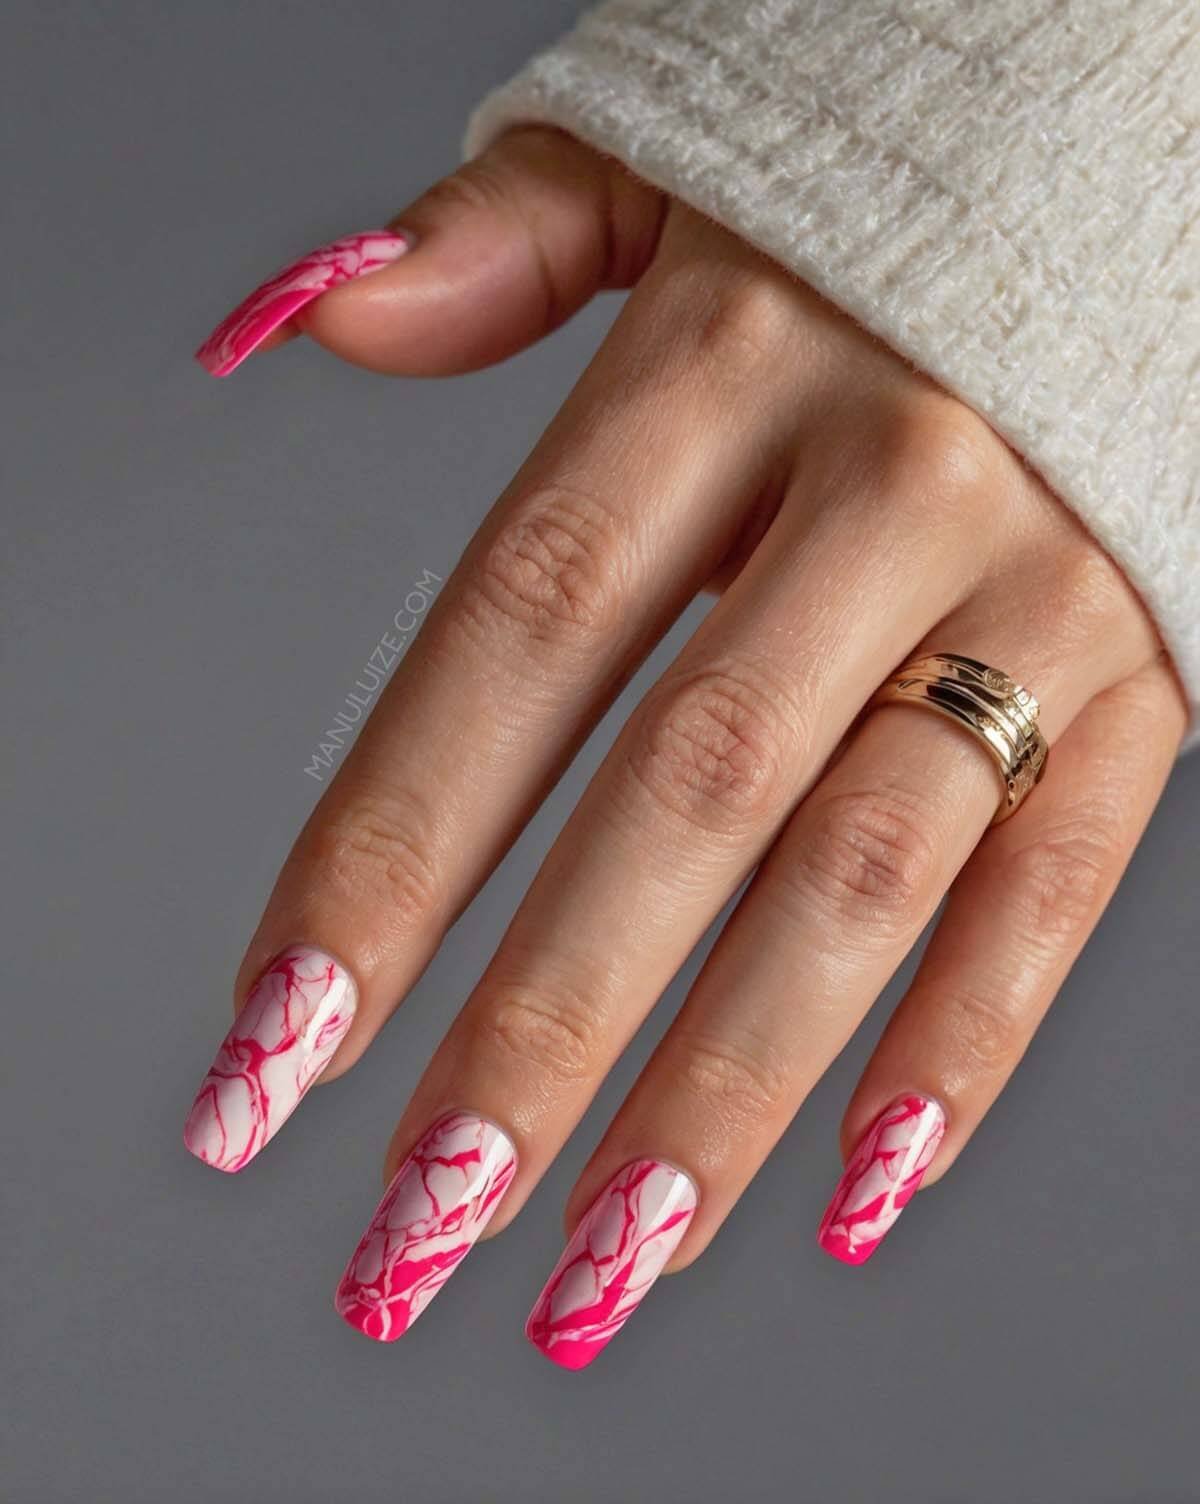 Hot pink and white marble nail